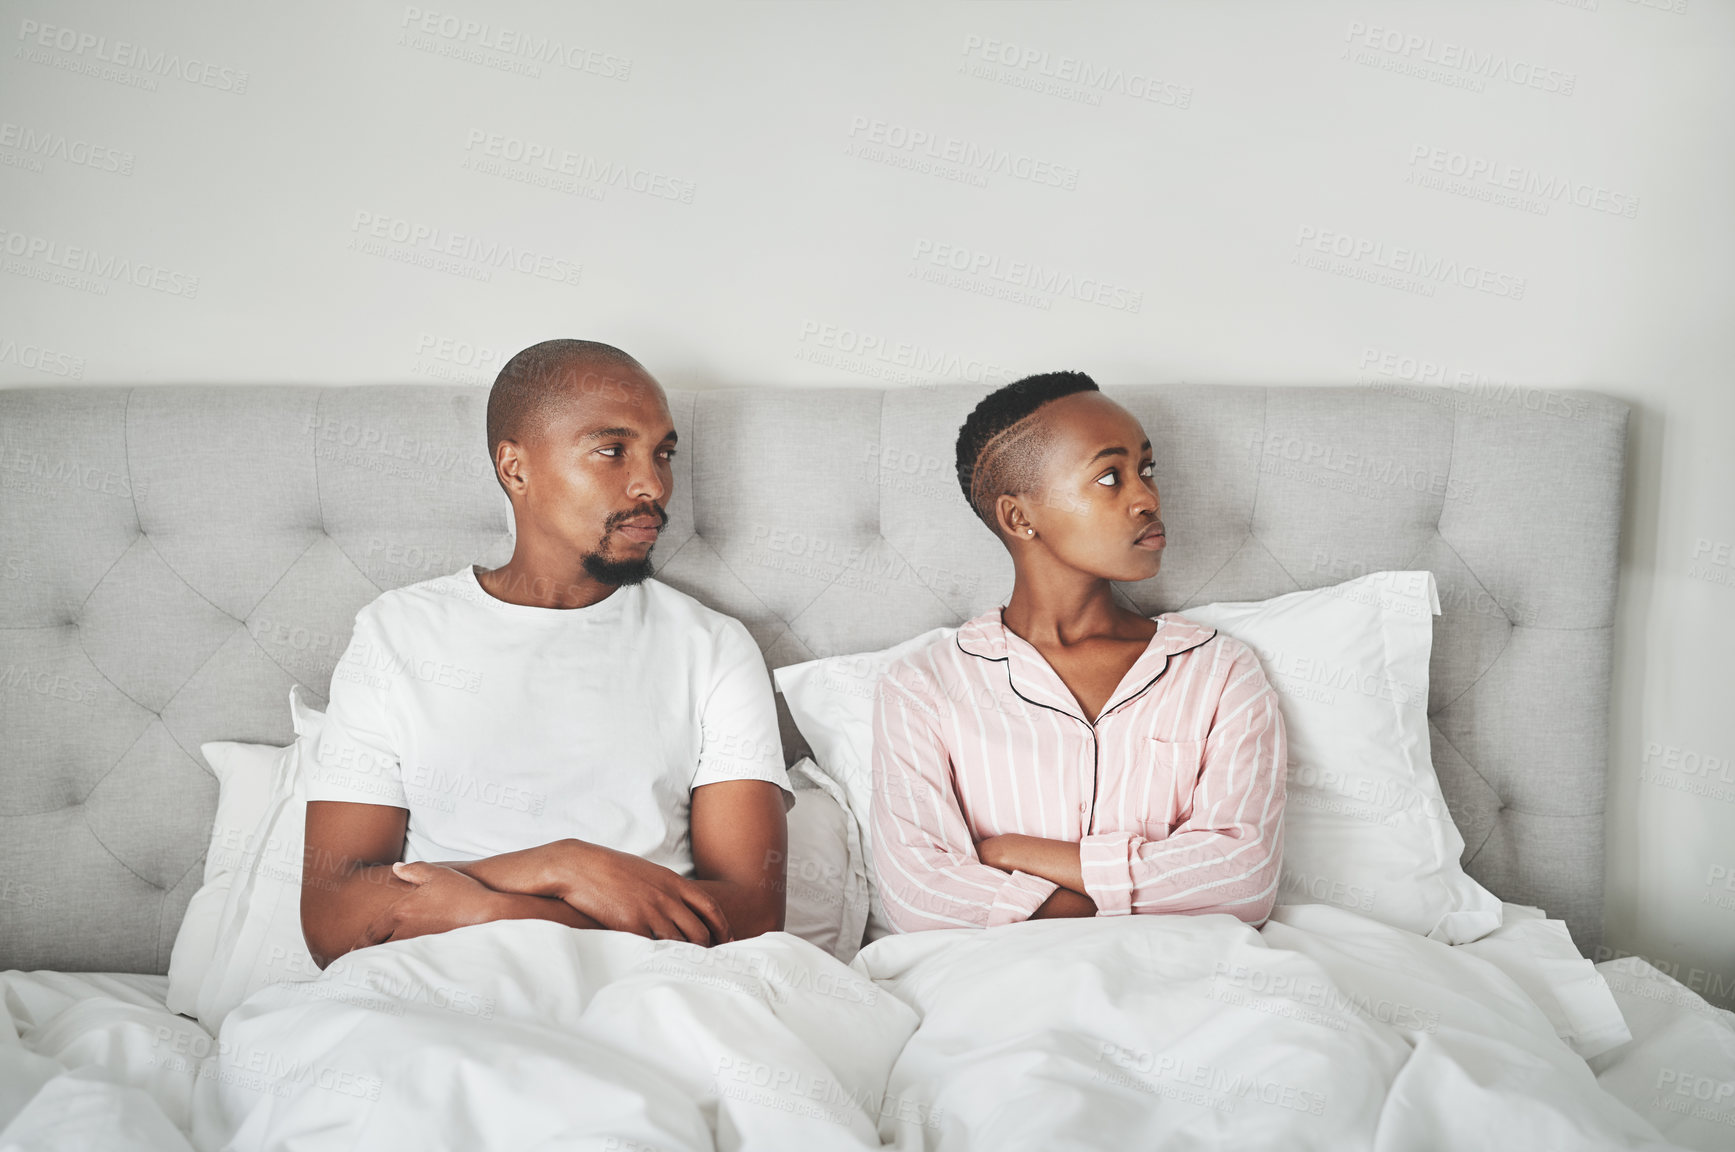 Buy stock photo Stress, fight and black couple lying in bed angry, affair and divorce argument or insomnia. Mental health, relationship and depression, woman ignoring man frustrated with sexual problem in bedroom.